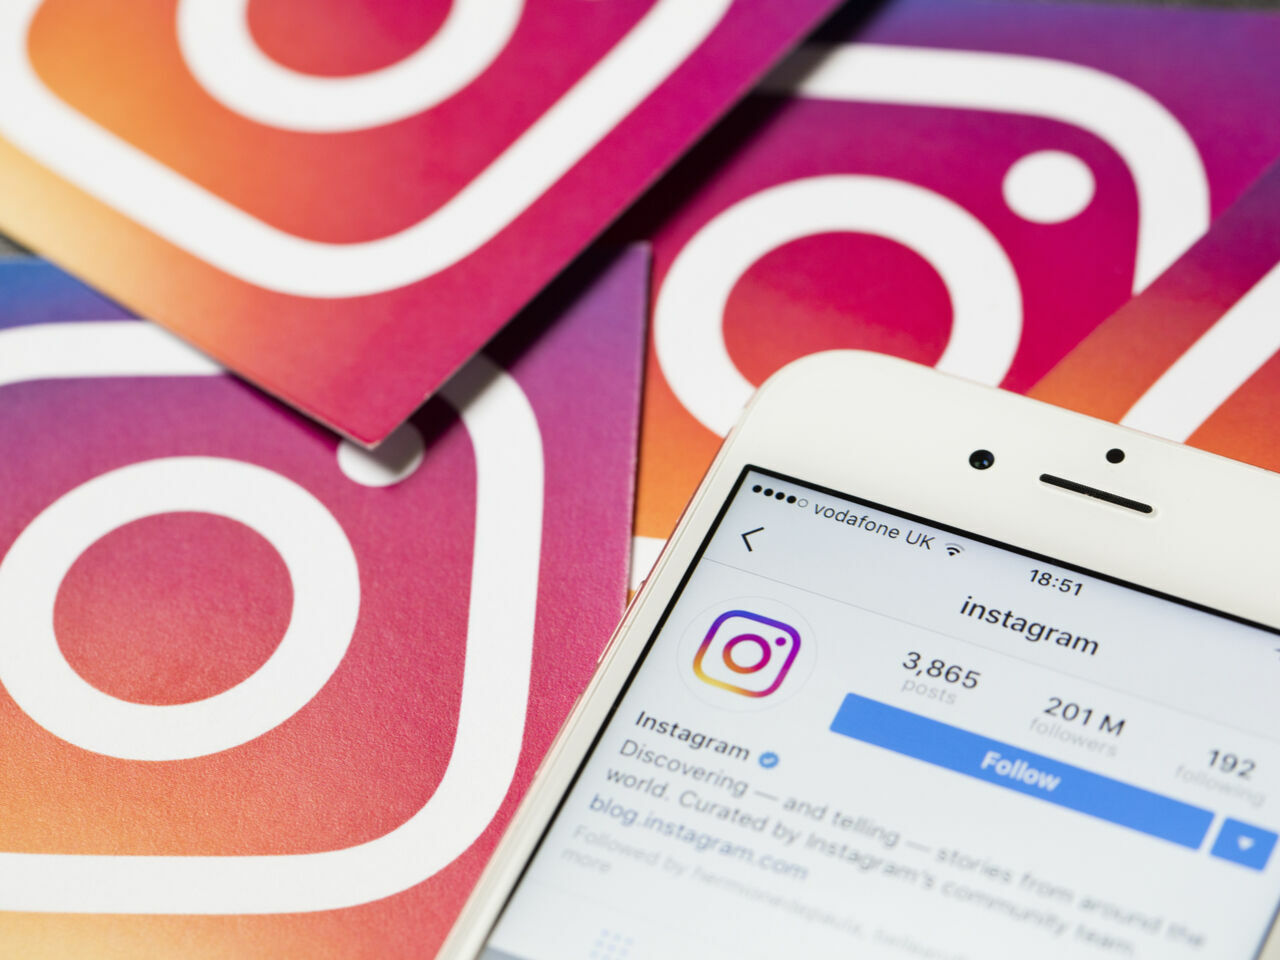 Instagram will launch a filter for offensive posts